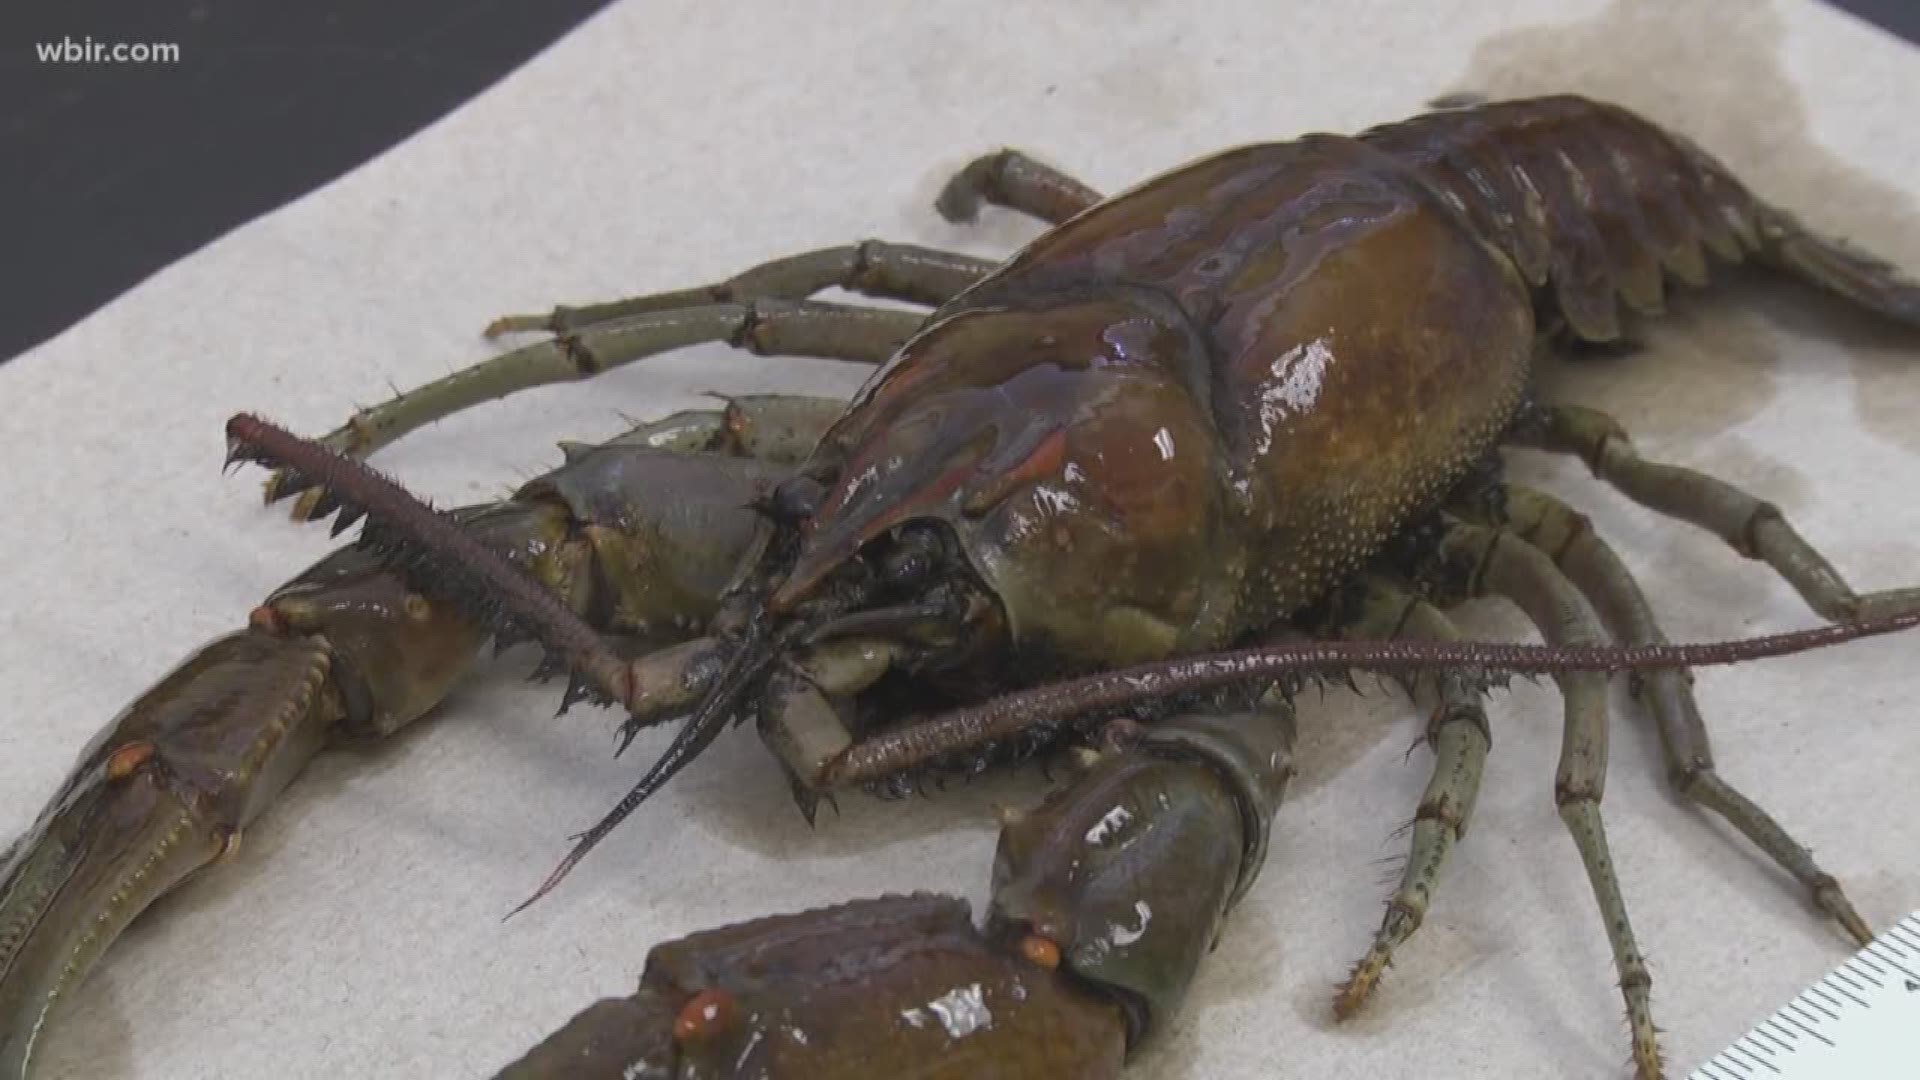 No, it's not a lobster. The 10-inch crawdad had been found inside a water intake plant in the Bowling Green area.